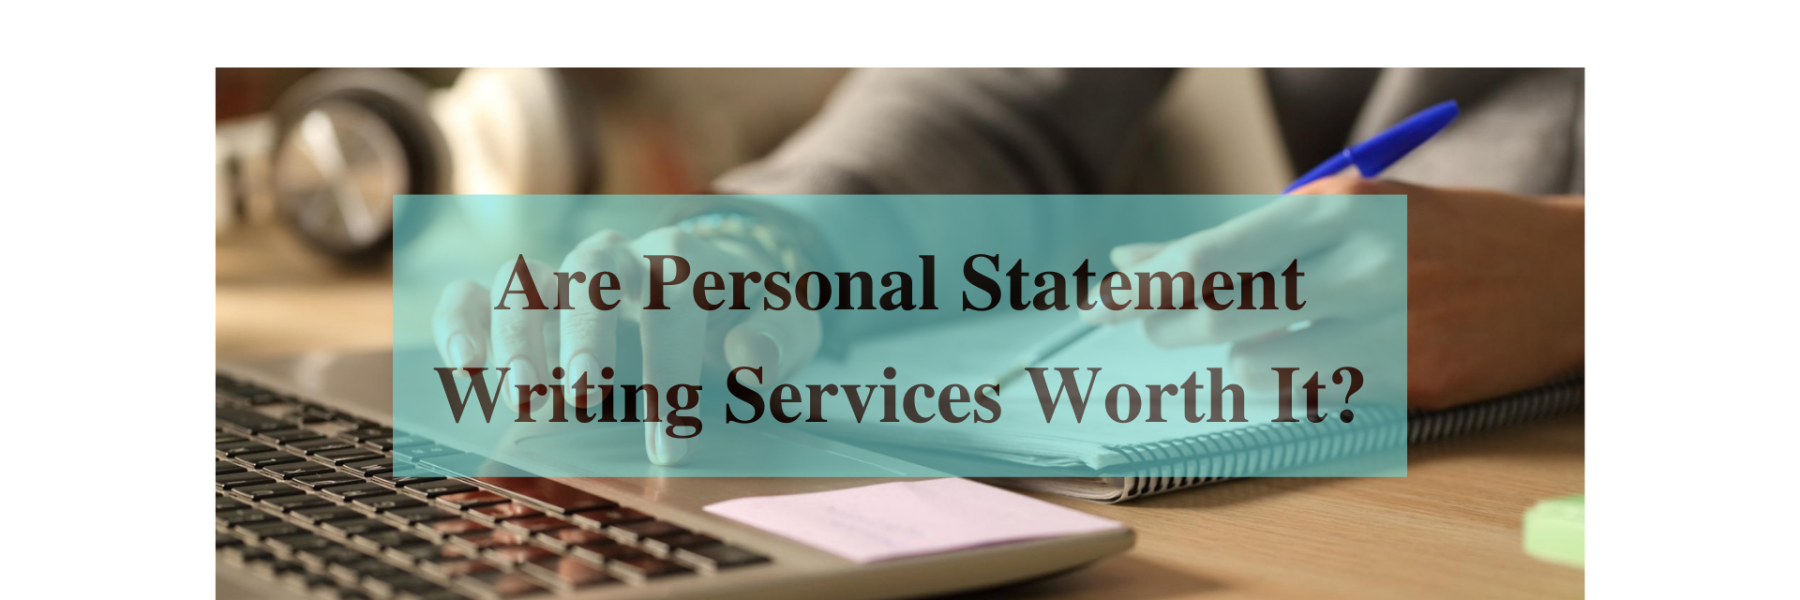 are personal statement writing services worth it?